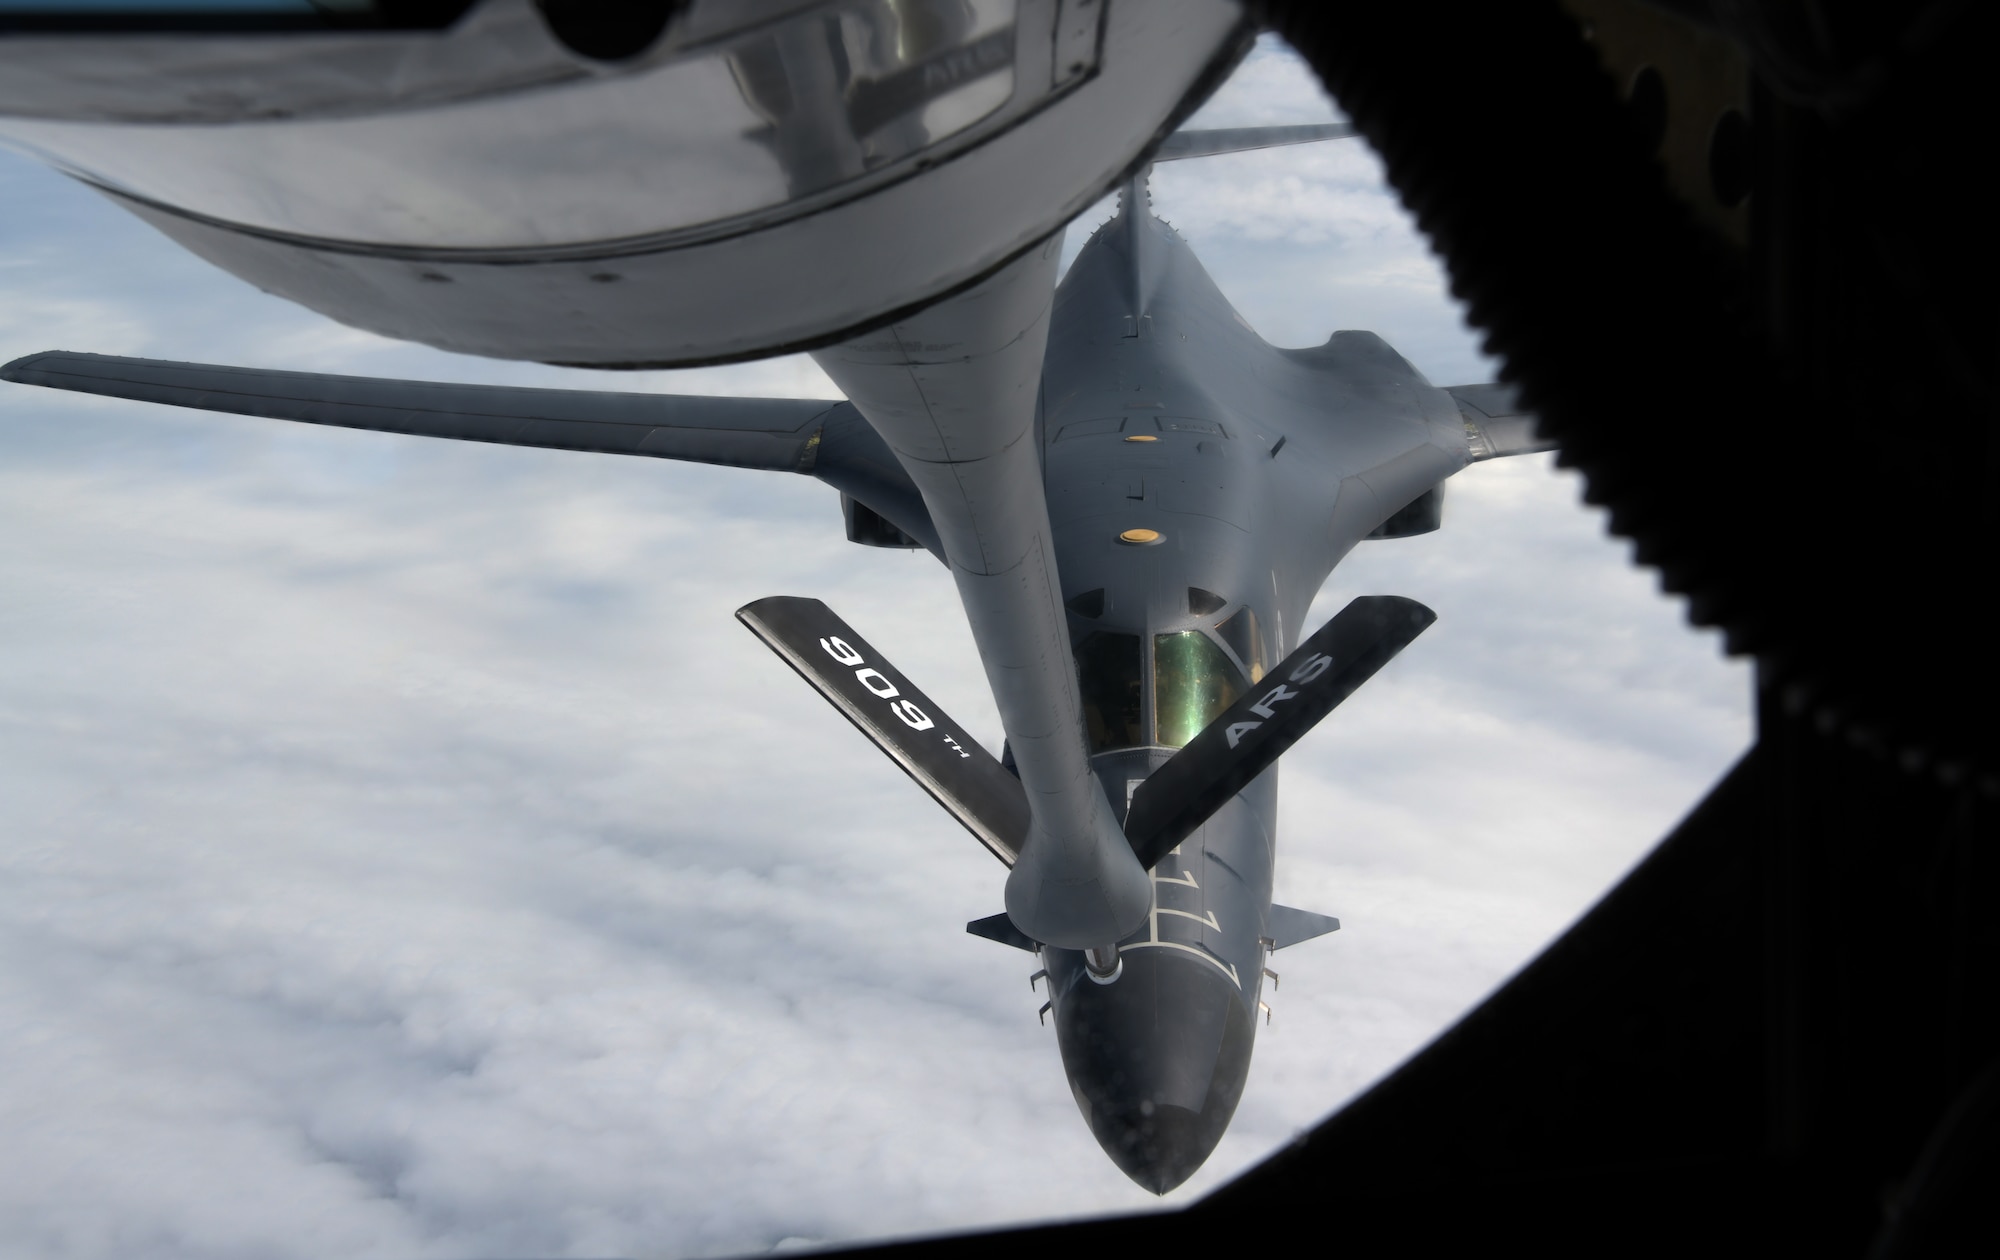 A U.S. Air Force B-1B Lancer from the 28th Bomb Wing, Ellsworth Air Force Base, S.D., approaches a KC-135 Stratotanker from the 909th Air Refueling Squadron, to refuel over the Pacific as part of a bilateral U.S. Indo-Pacific Command and U.S. Strategic Command (USSTRACTCOM) Bomber Task Force (BTF) mission July 17, 2020.  This operation demonstrates the U.S. Air Force’s dynamic force employment model in line with the National Defense Strategy’s objectives of strategic predictability with persistent bomber presences, assuring allies and partners. (U.S. Air Force photo by Airman 1st Class Rebeckah Medeiros)